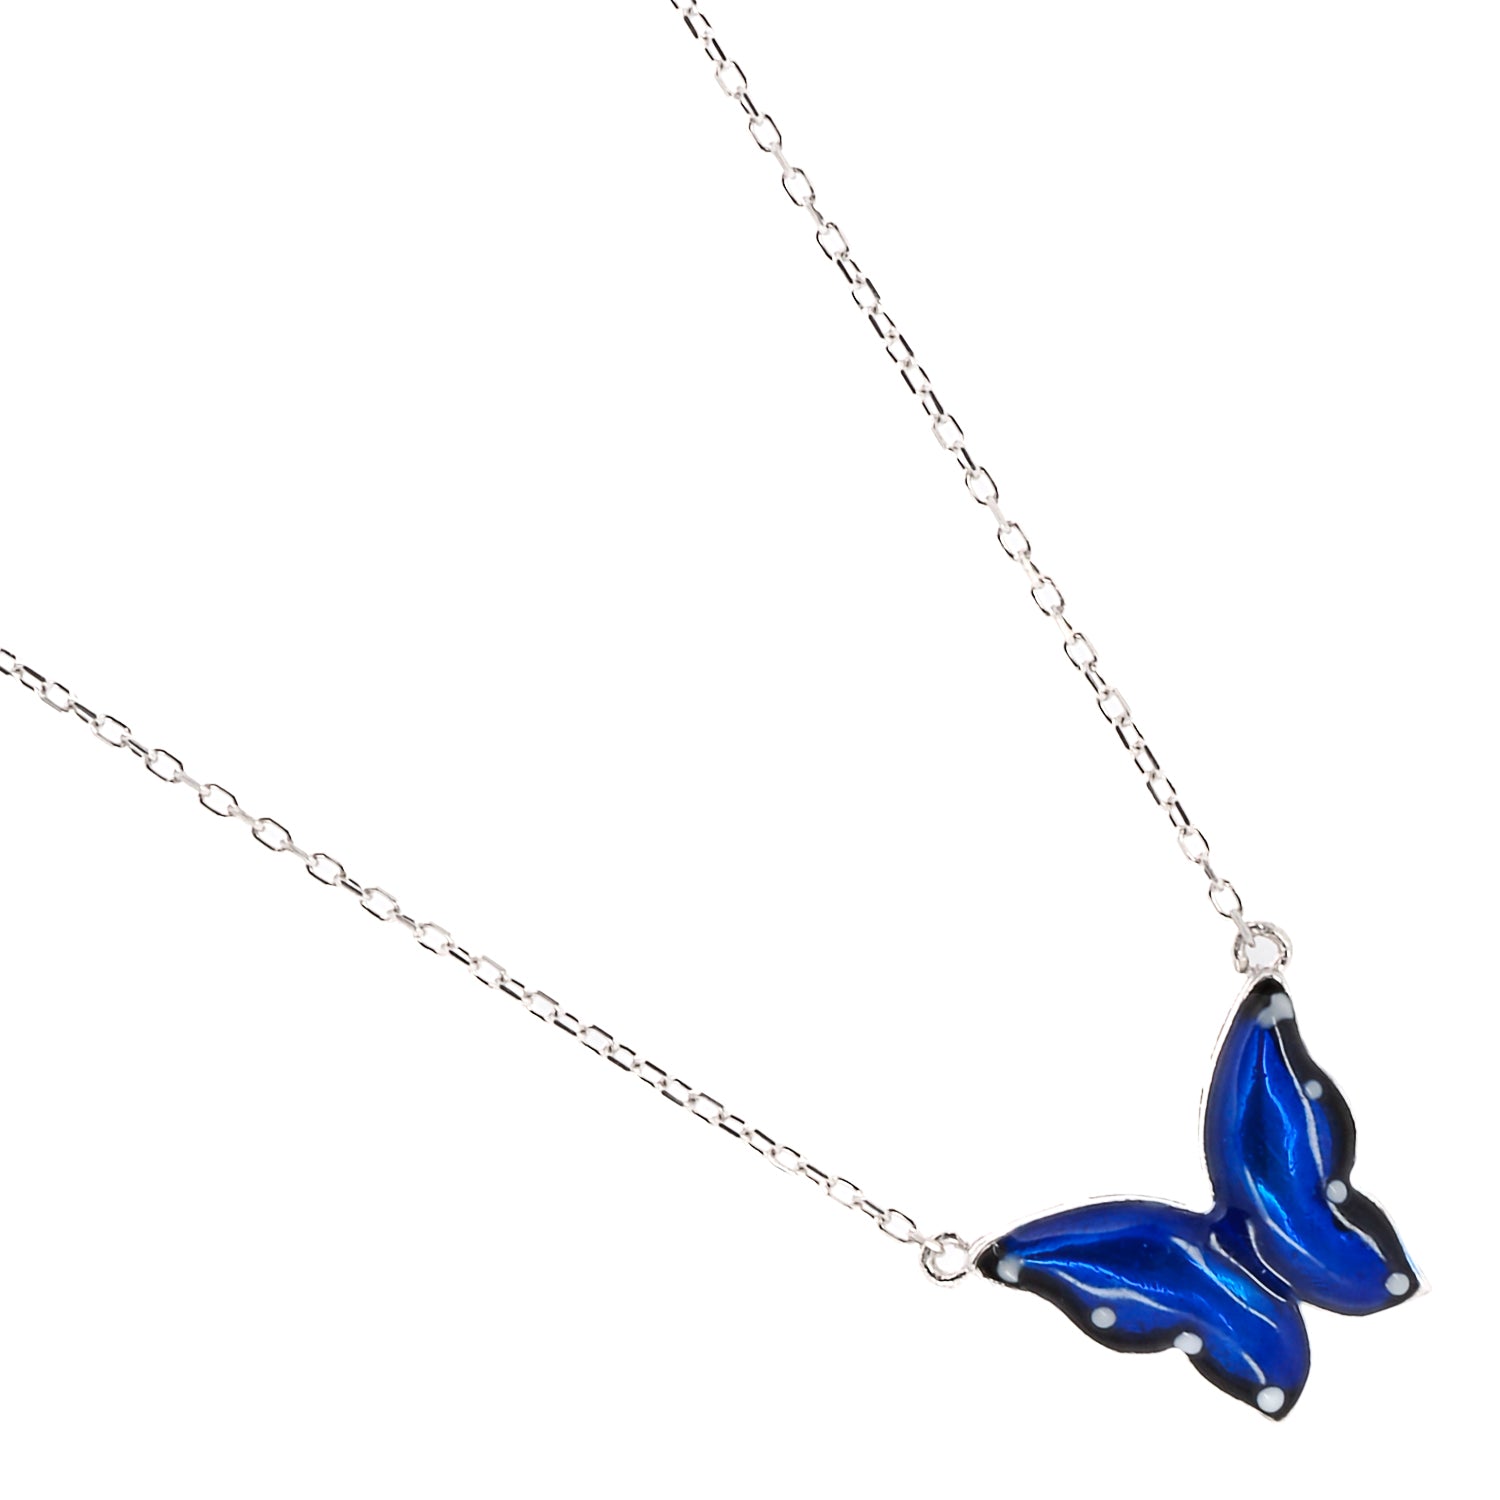 Silver Spiritual Blue Enamel Butterfly Necklace, a handmade piece of jewelry that inspires spiritual growth and self-transformation.